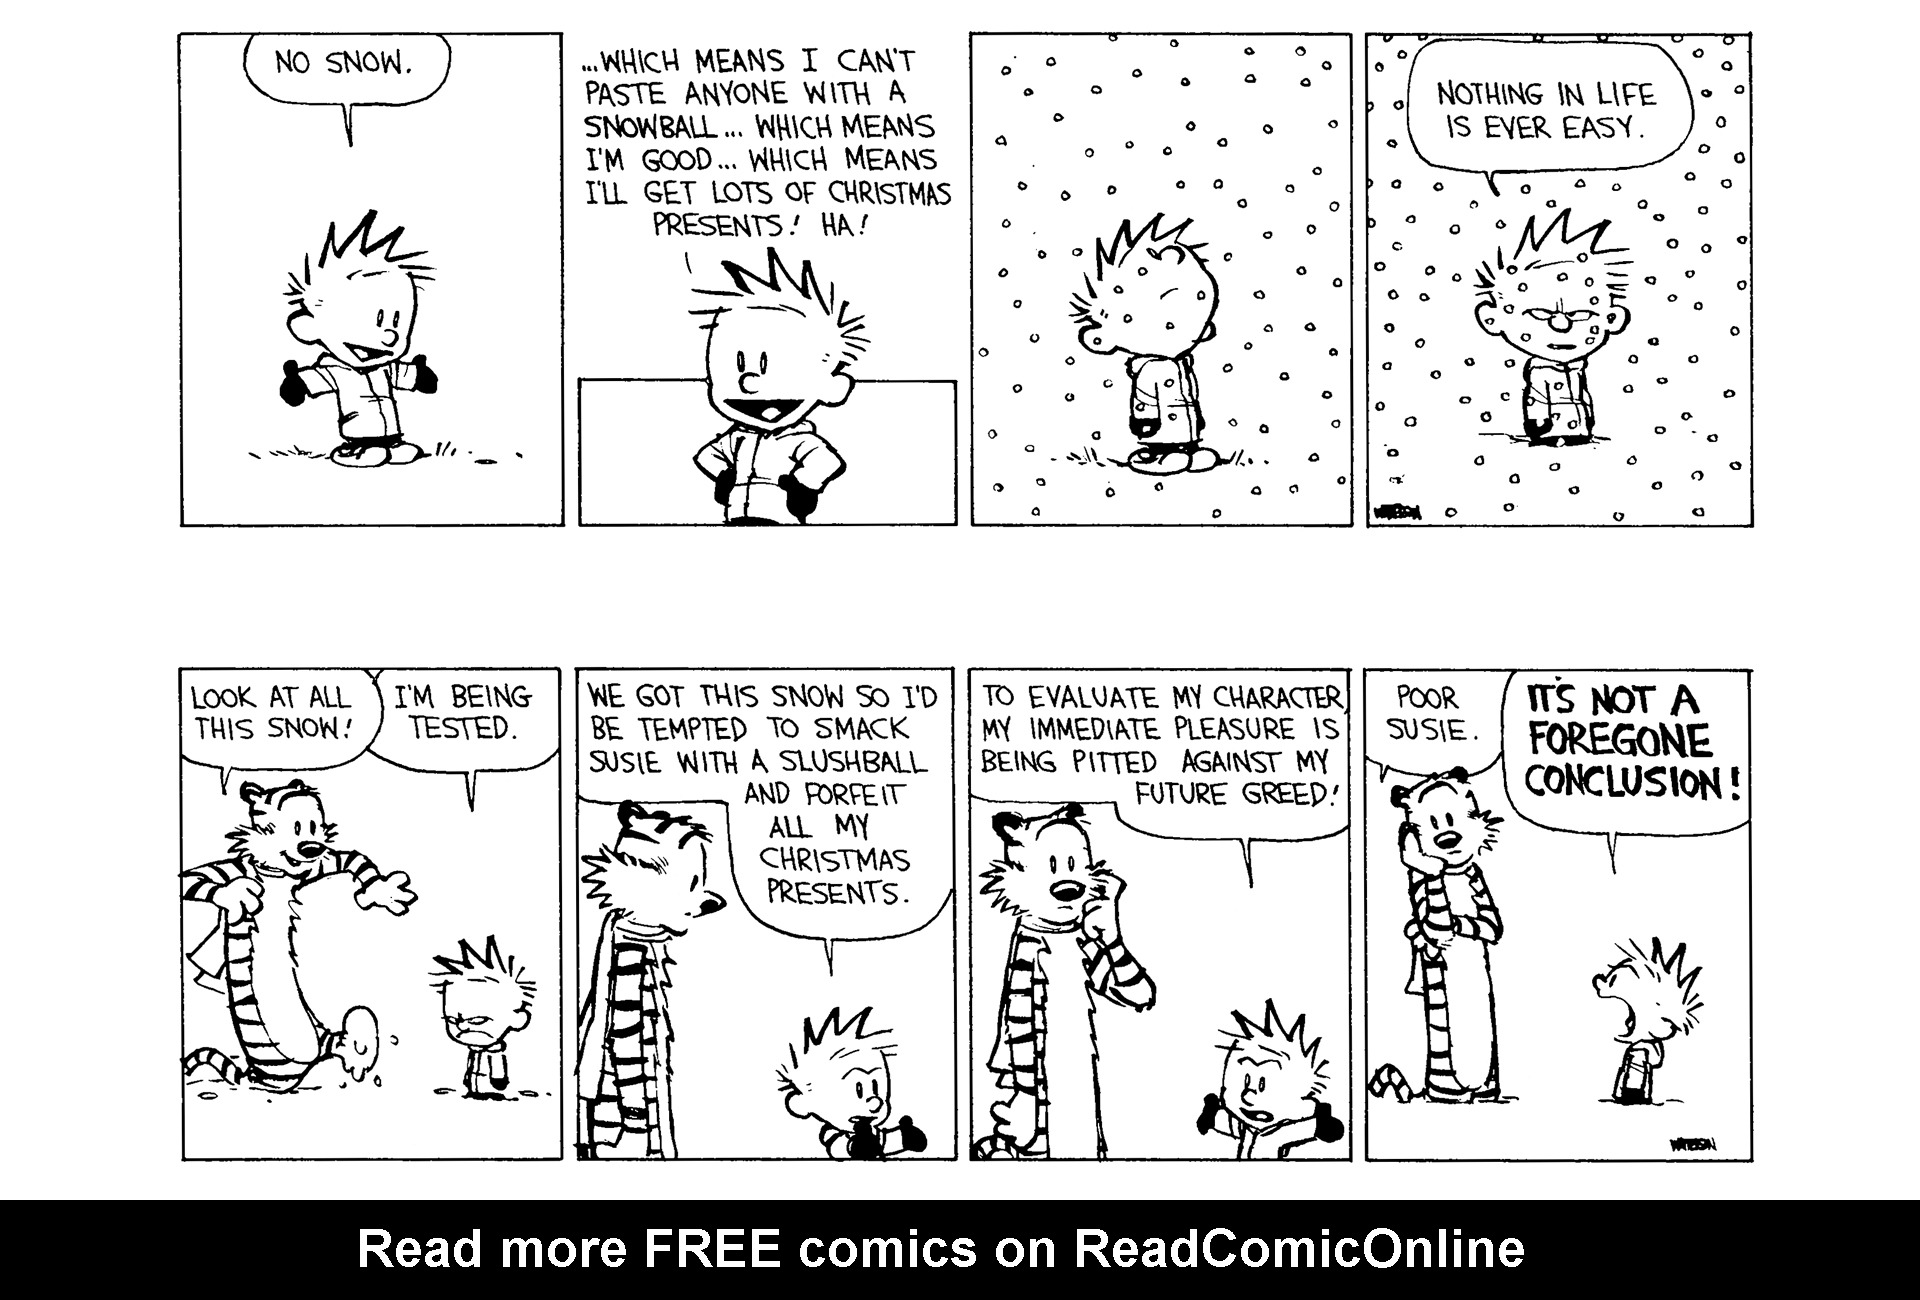 Calvin And Hobbes Susie Porn - Calvin And Hobbes Issue 10 | Read Calvin And Hobbes Issue 10 comic online  in high quality. Read Full Comic online for free - Read comics online in  high quality .|viewcomiconline.com